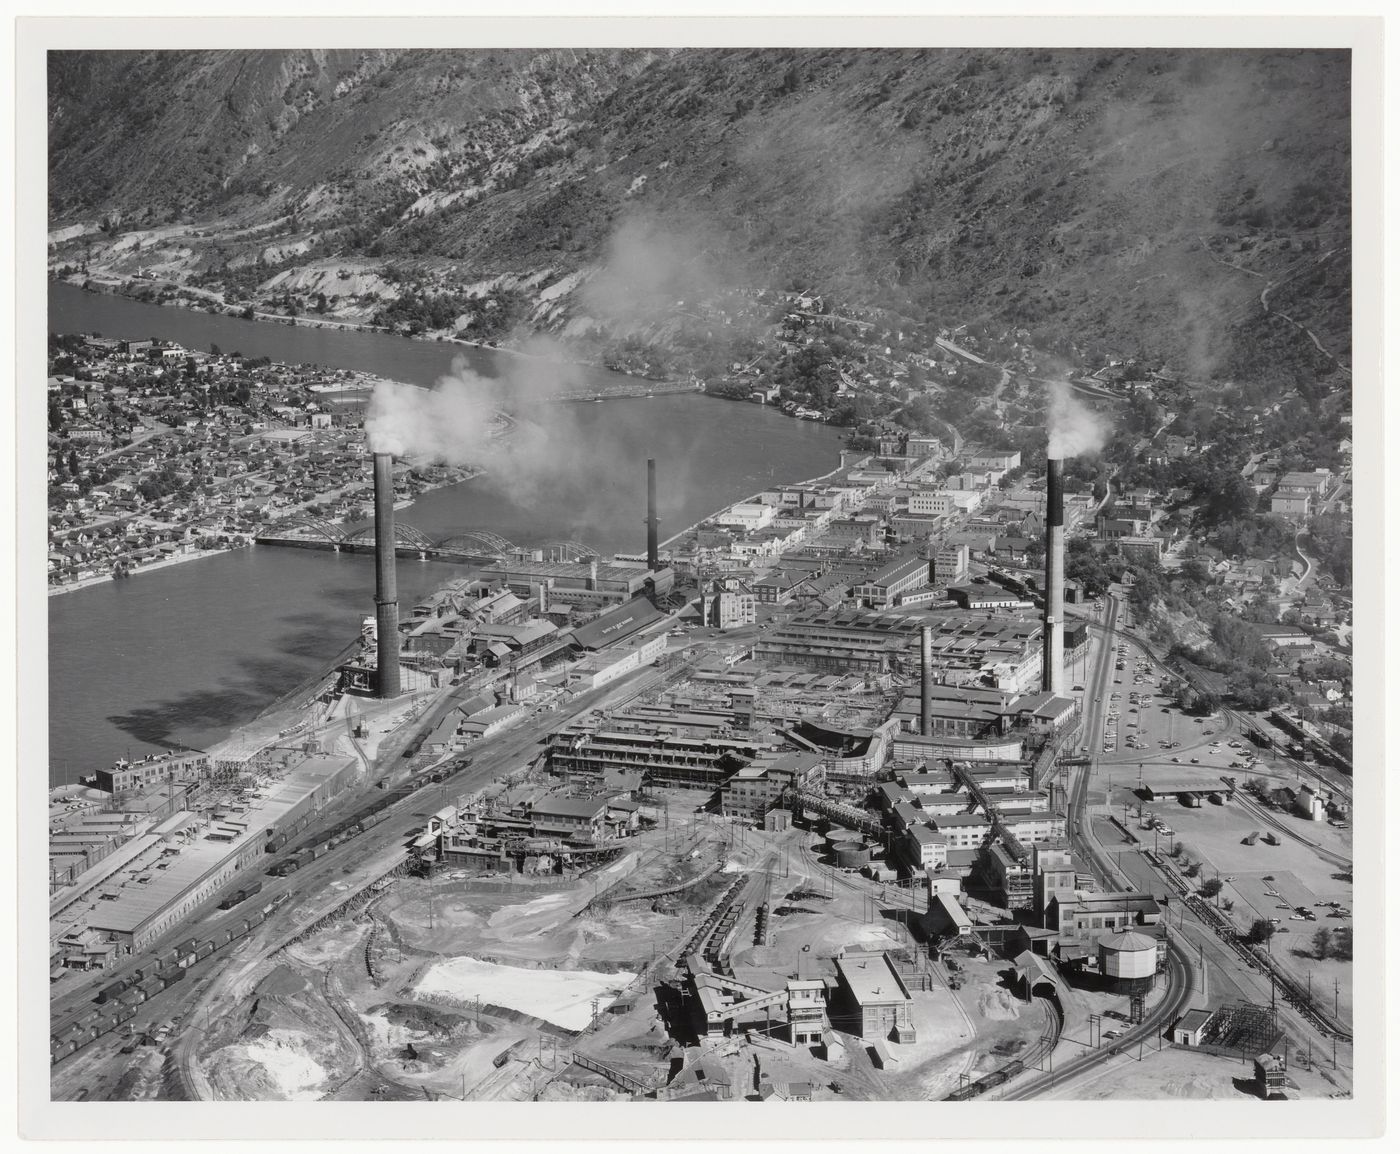 British Columbia: Trail - with Columbia River and the gigantic Cominco smelter